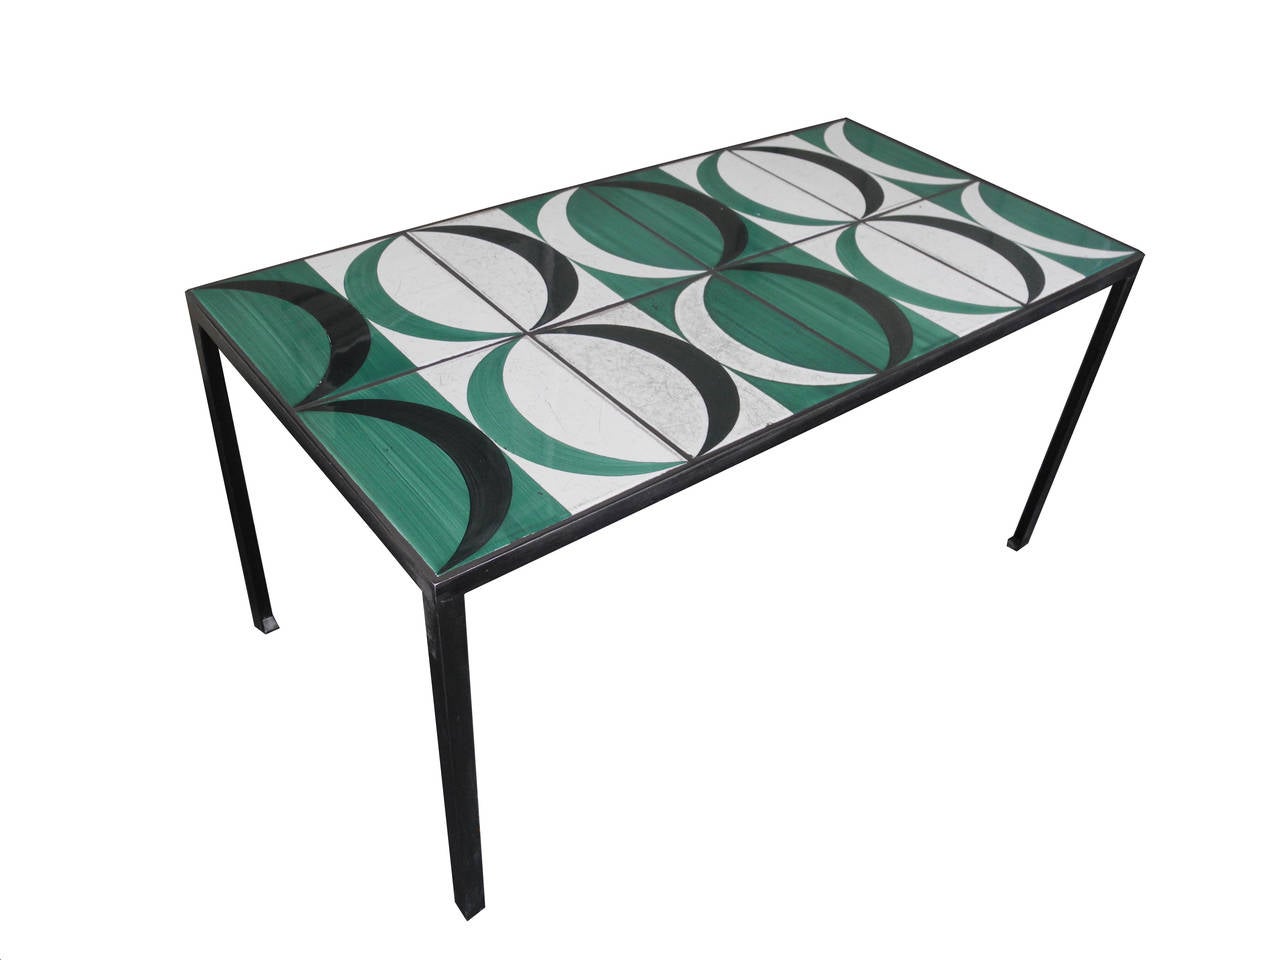 20th Century Modern Coffee Table, Side Table with Original Gio Ponti Tiles, Italy